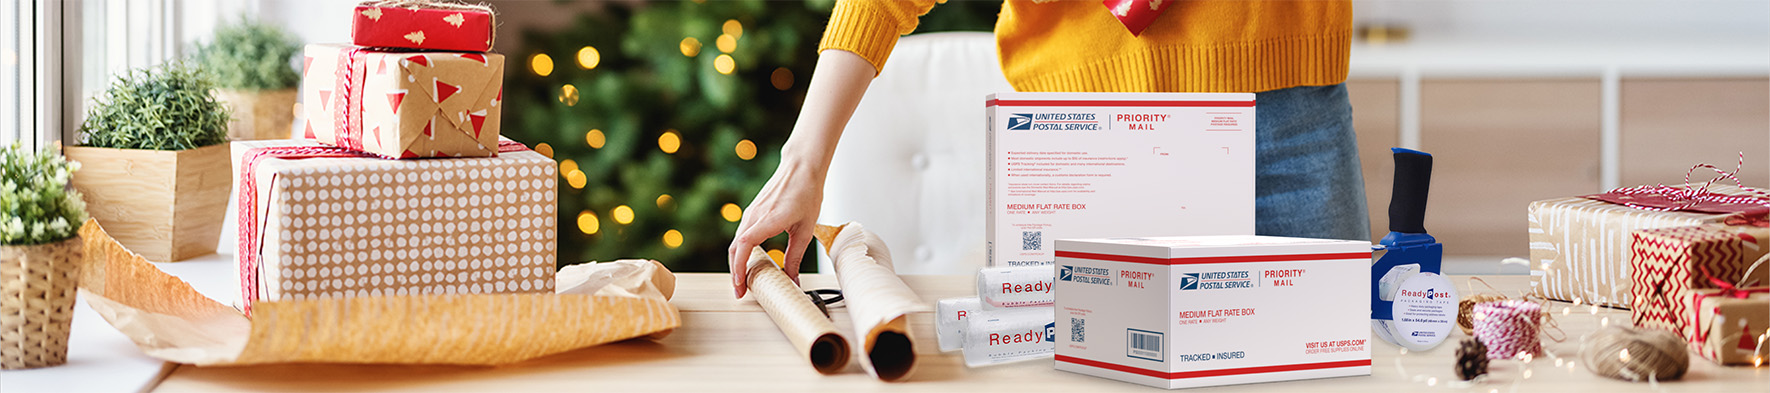 Person wrapping holiday gifts to ship using Priority Mail boxes and ReadyPost supplies.